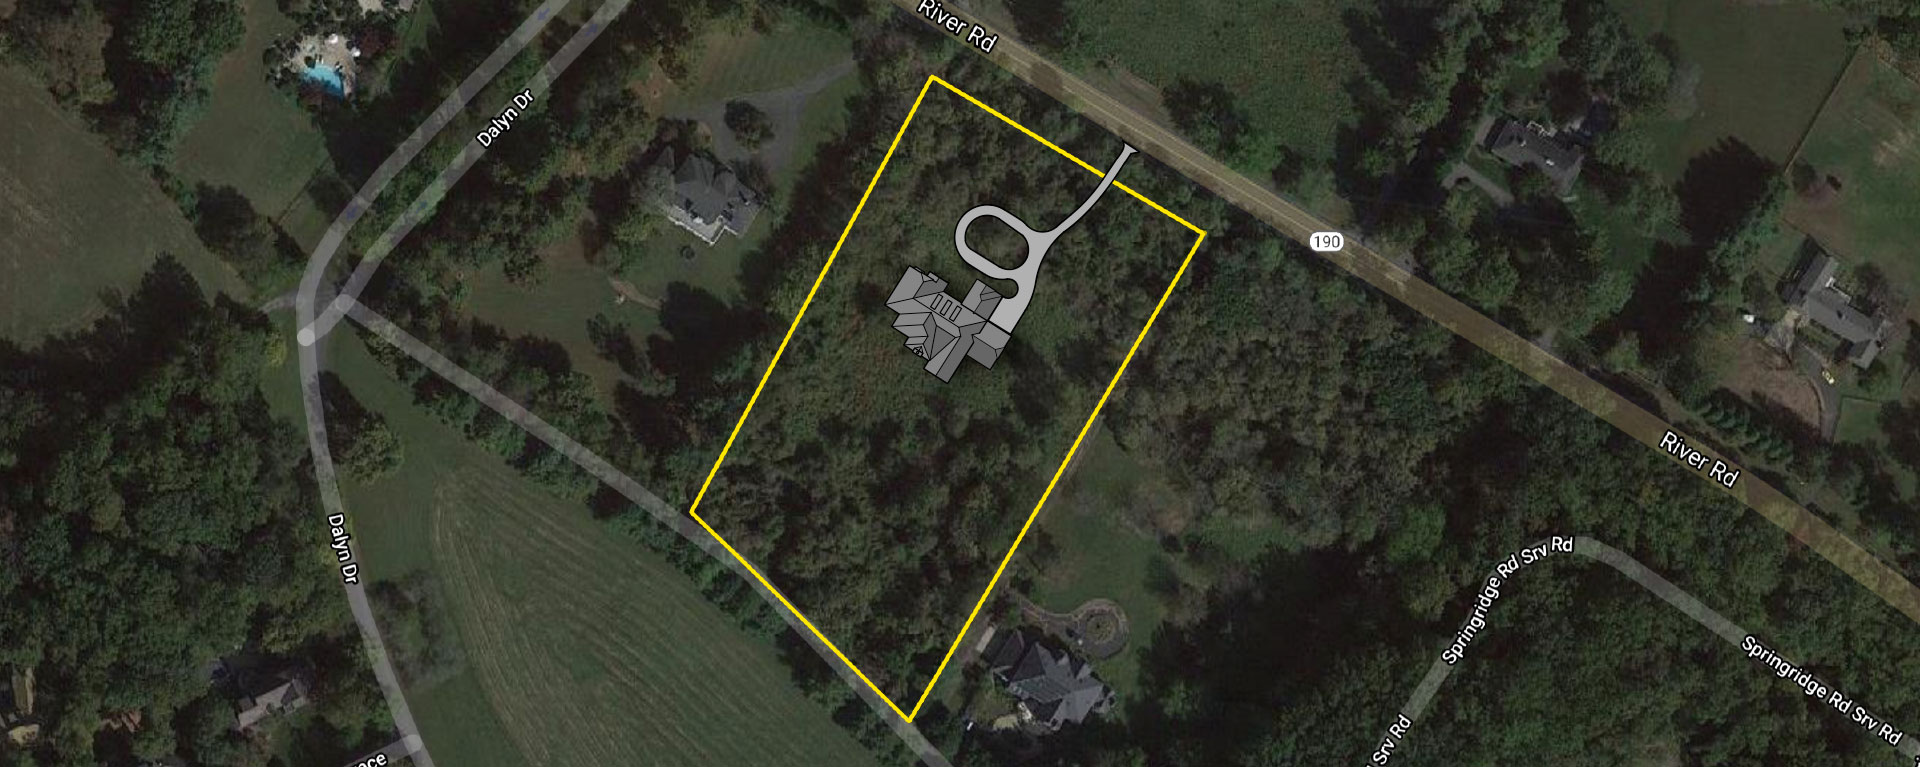 An satellite image showing a site outline on river road with proposed home placement superimposed, including circular driveway